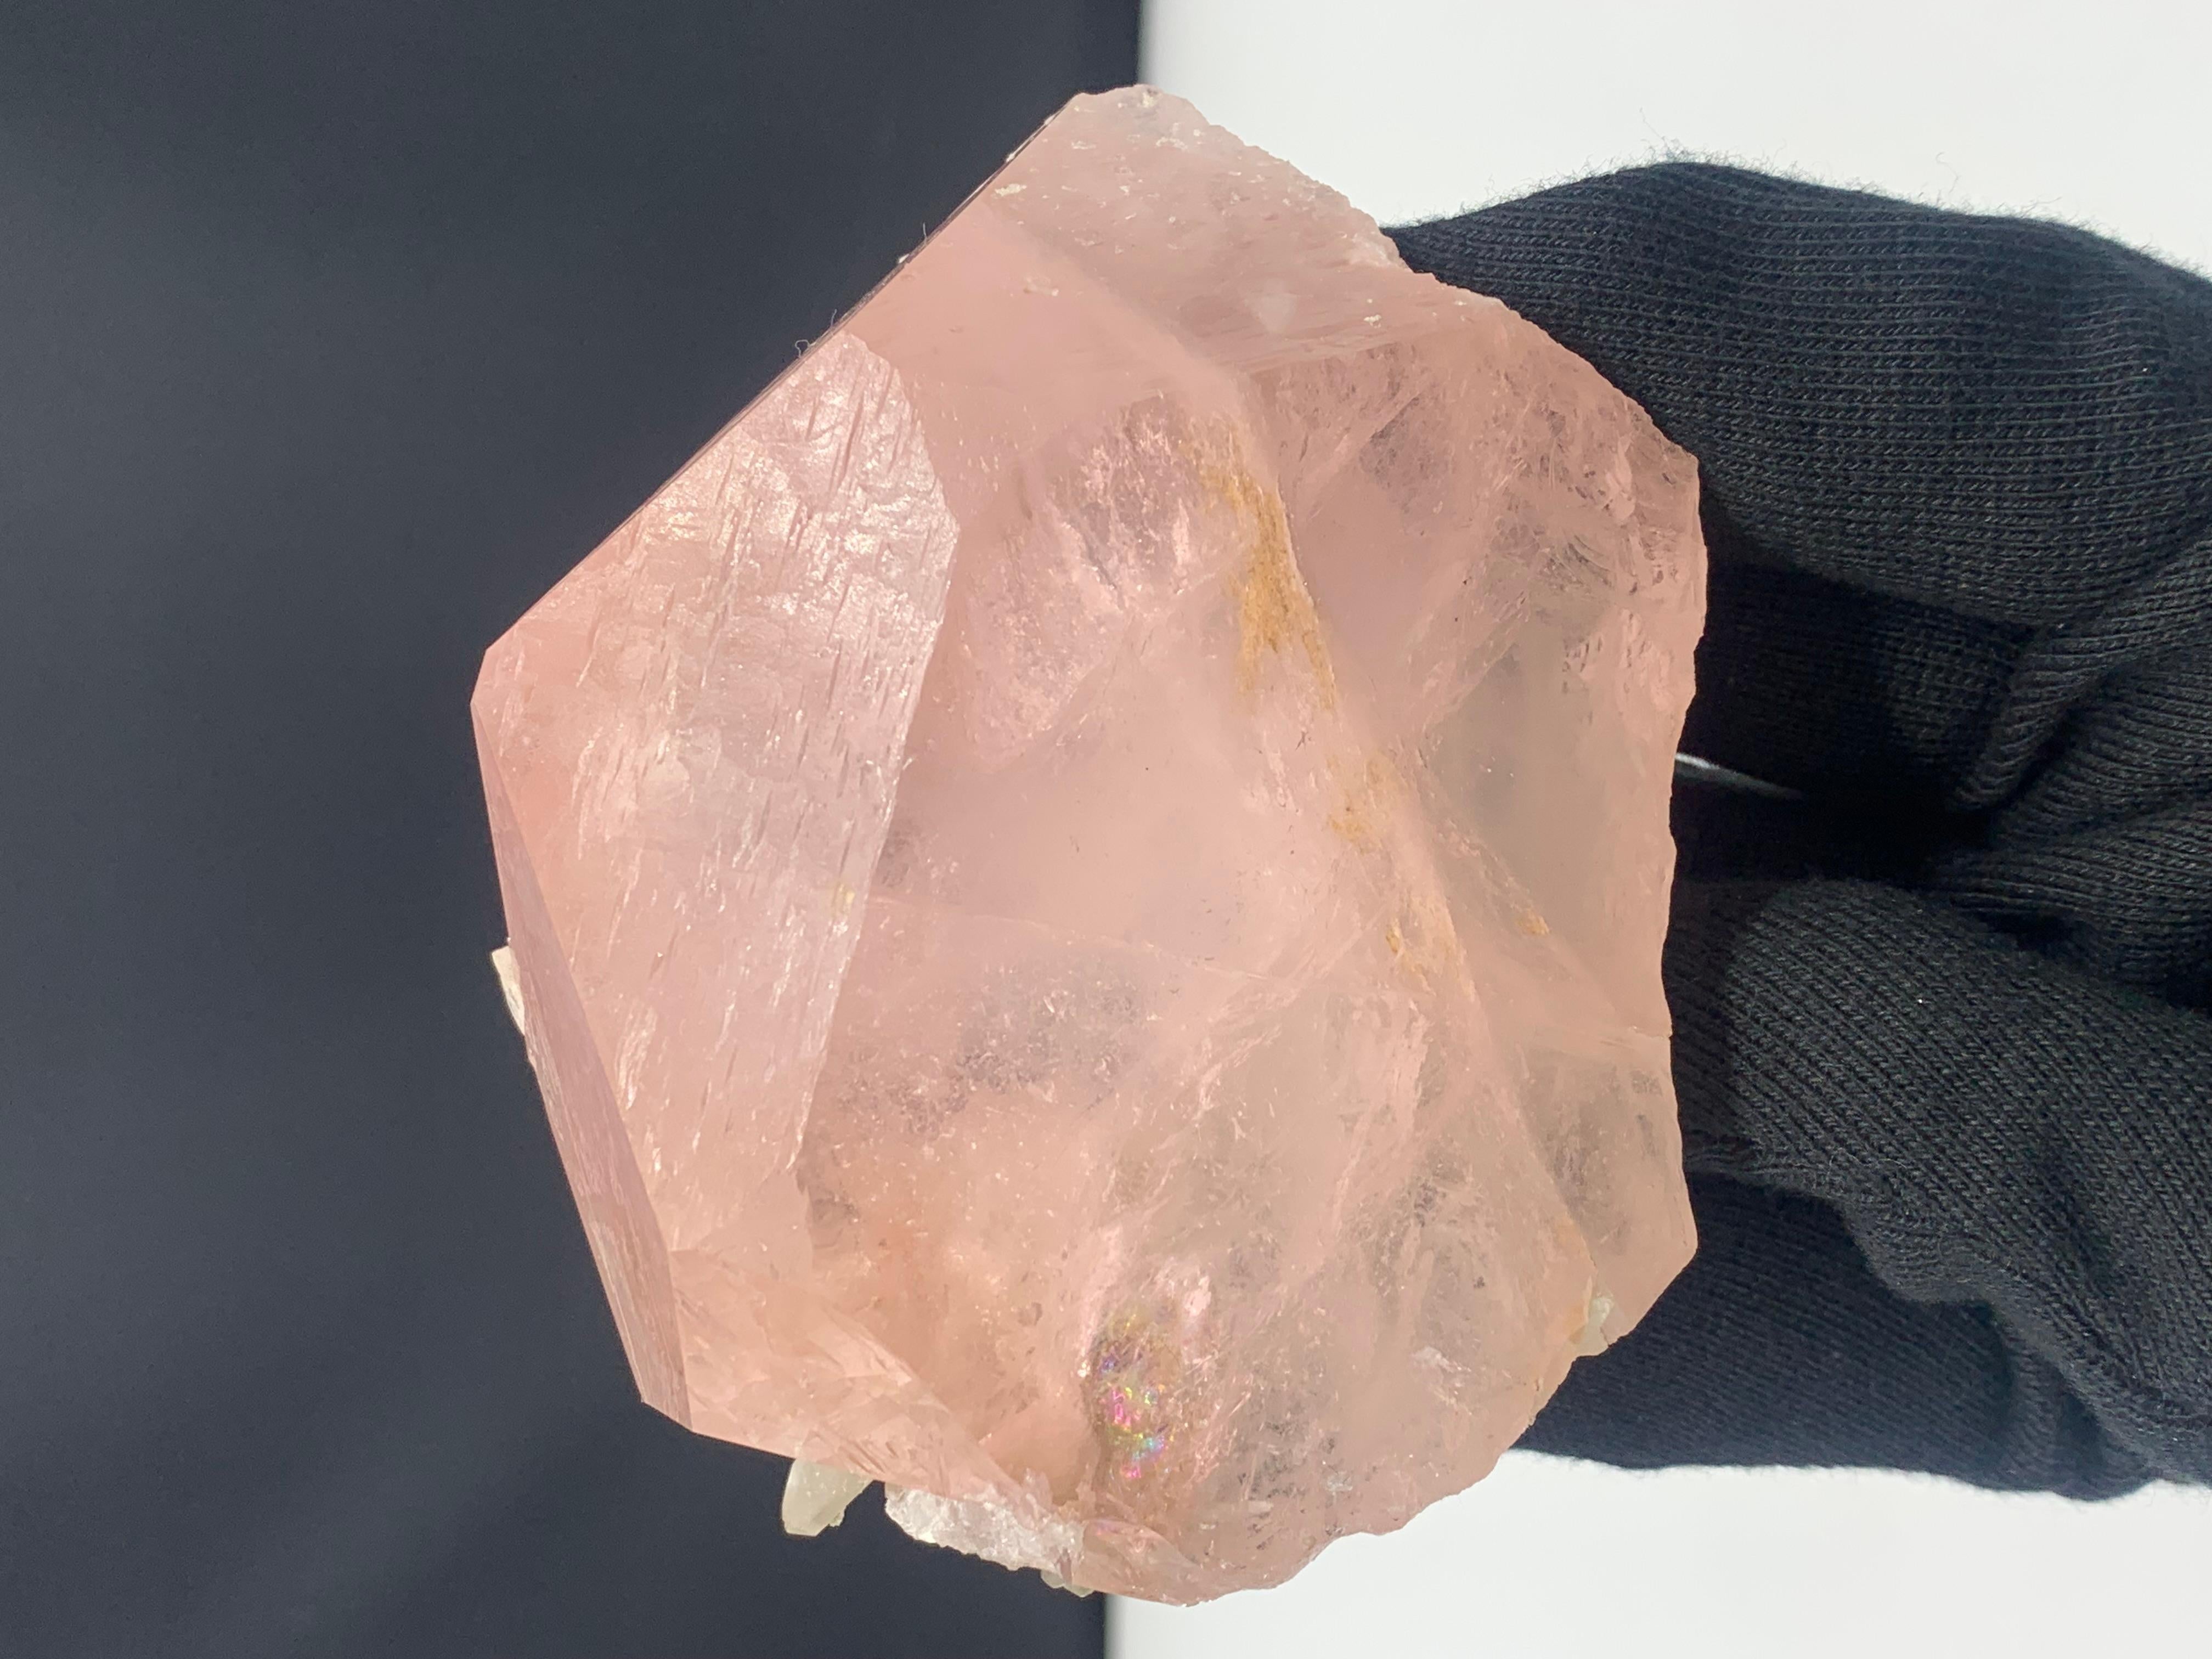 Adam Style 437.51 Gram Lovely Morganite Specimen With Muscovite From Kunar, Afghanistan  For Sale